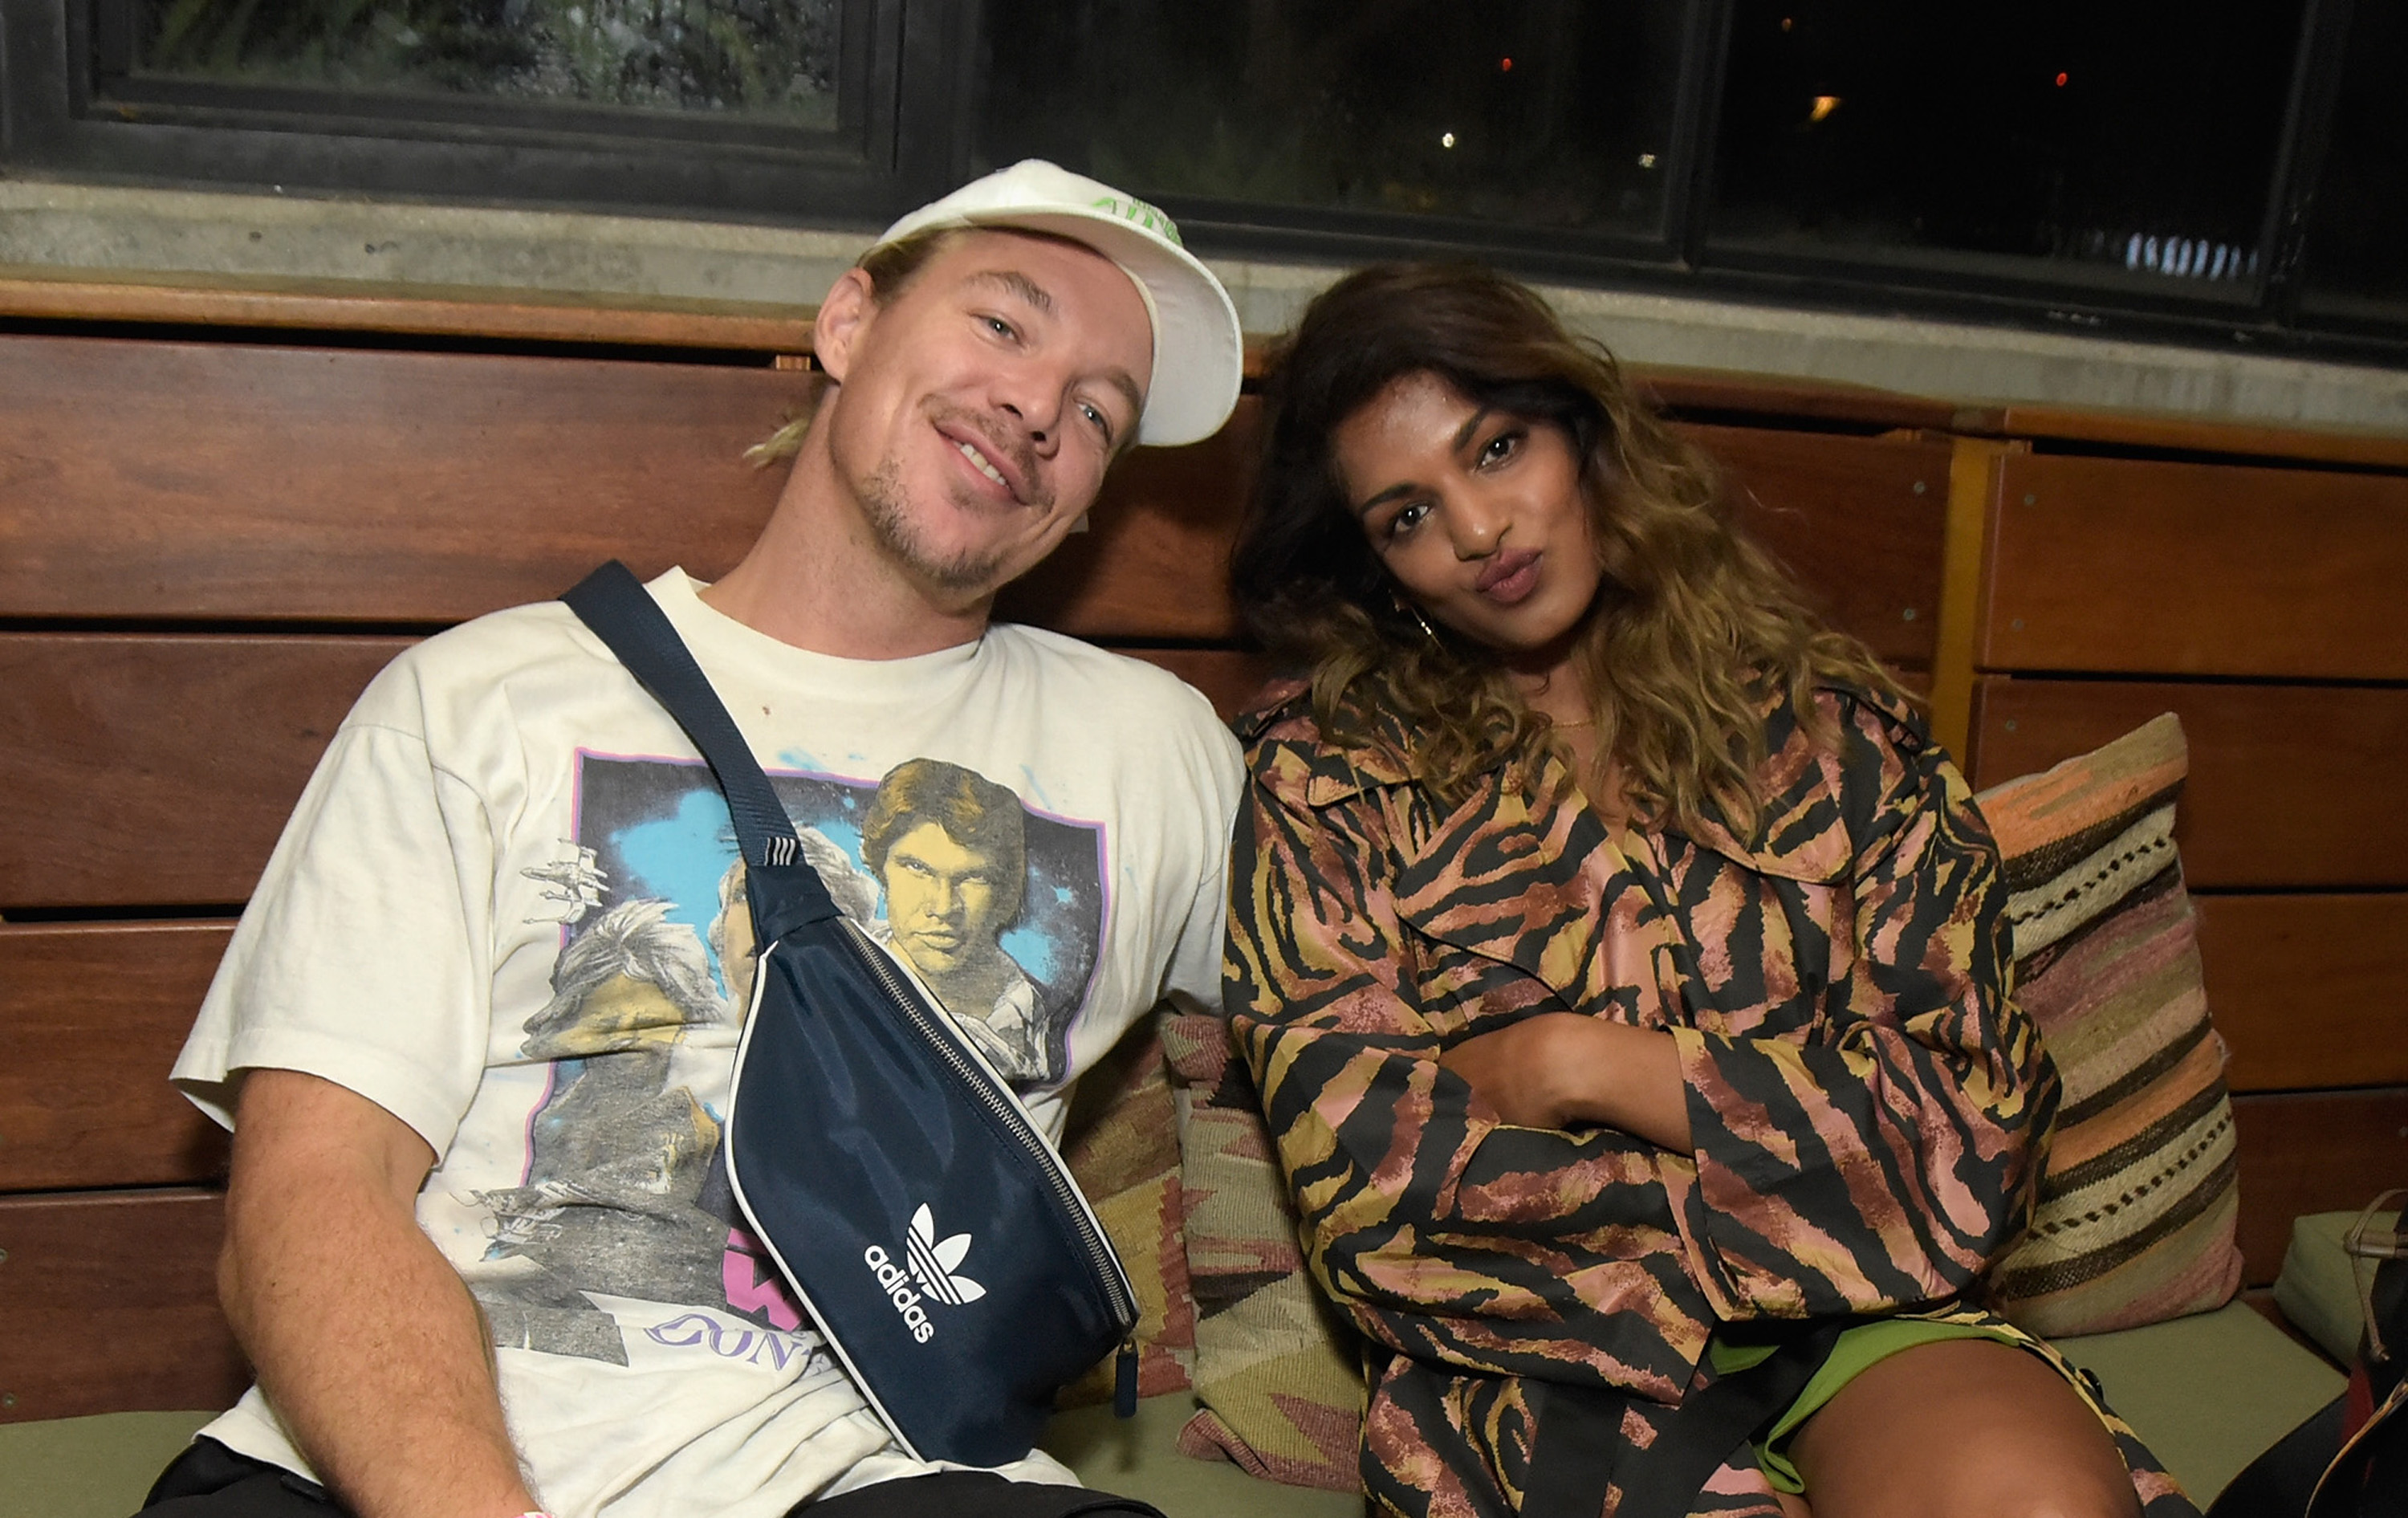 Diplo and M.I.A. at the after party for the premiere of "Matangi/Maya/M.I.A." on August 20, 2018, in Los Angeles, California. | Source: Getty Images